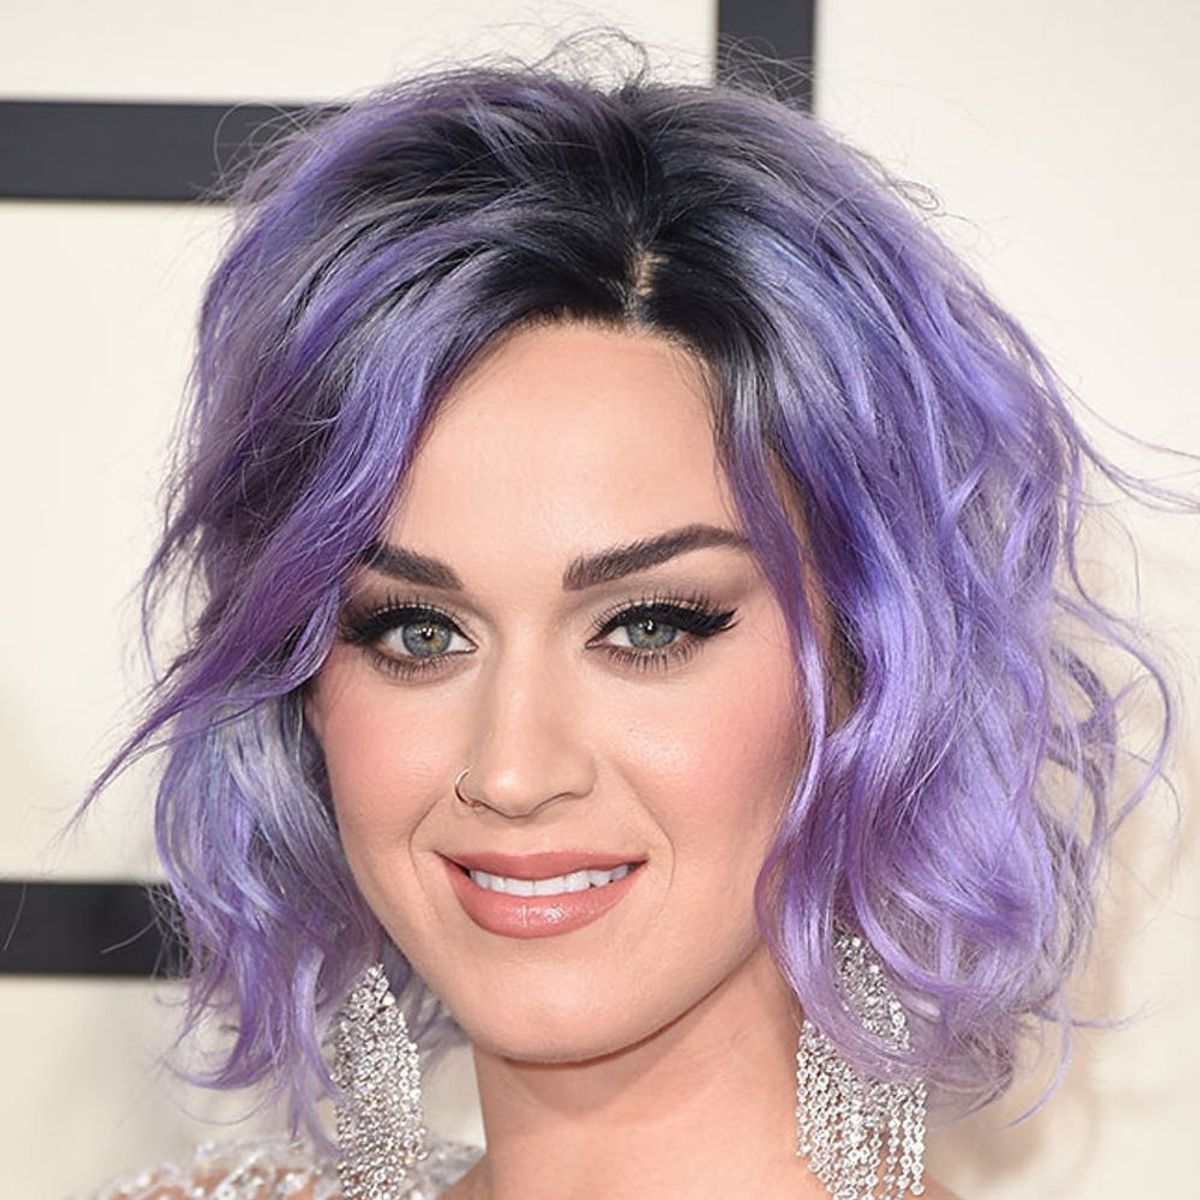 This Is NOT How We’re Used to Seeing Katy Perry’s Hair